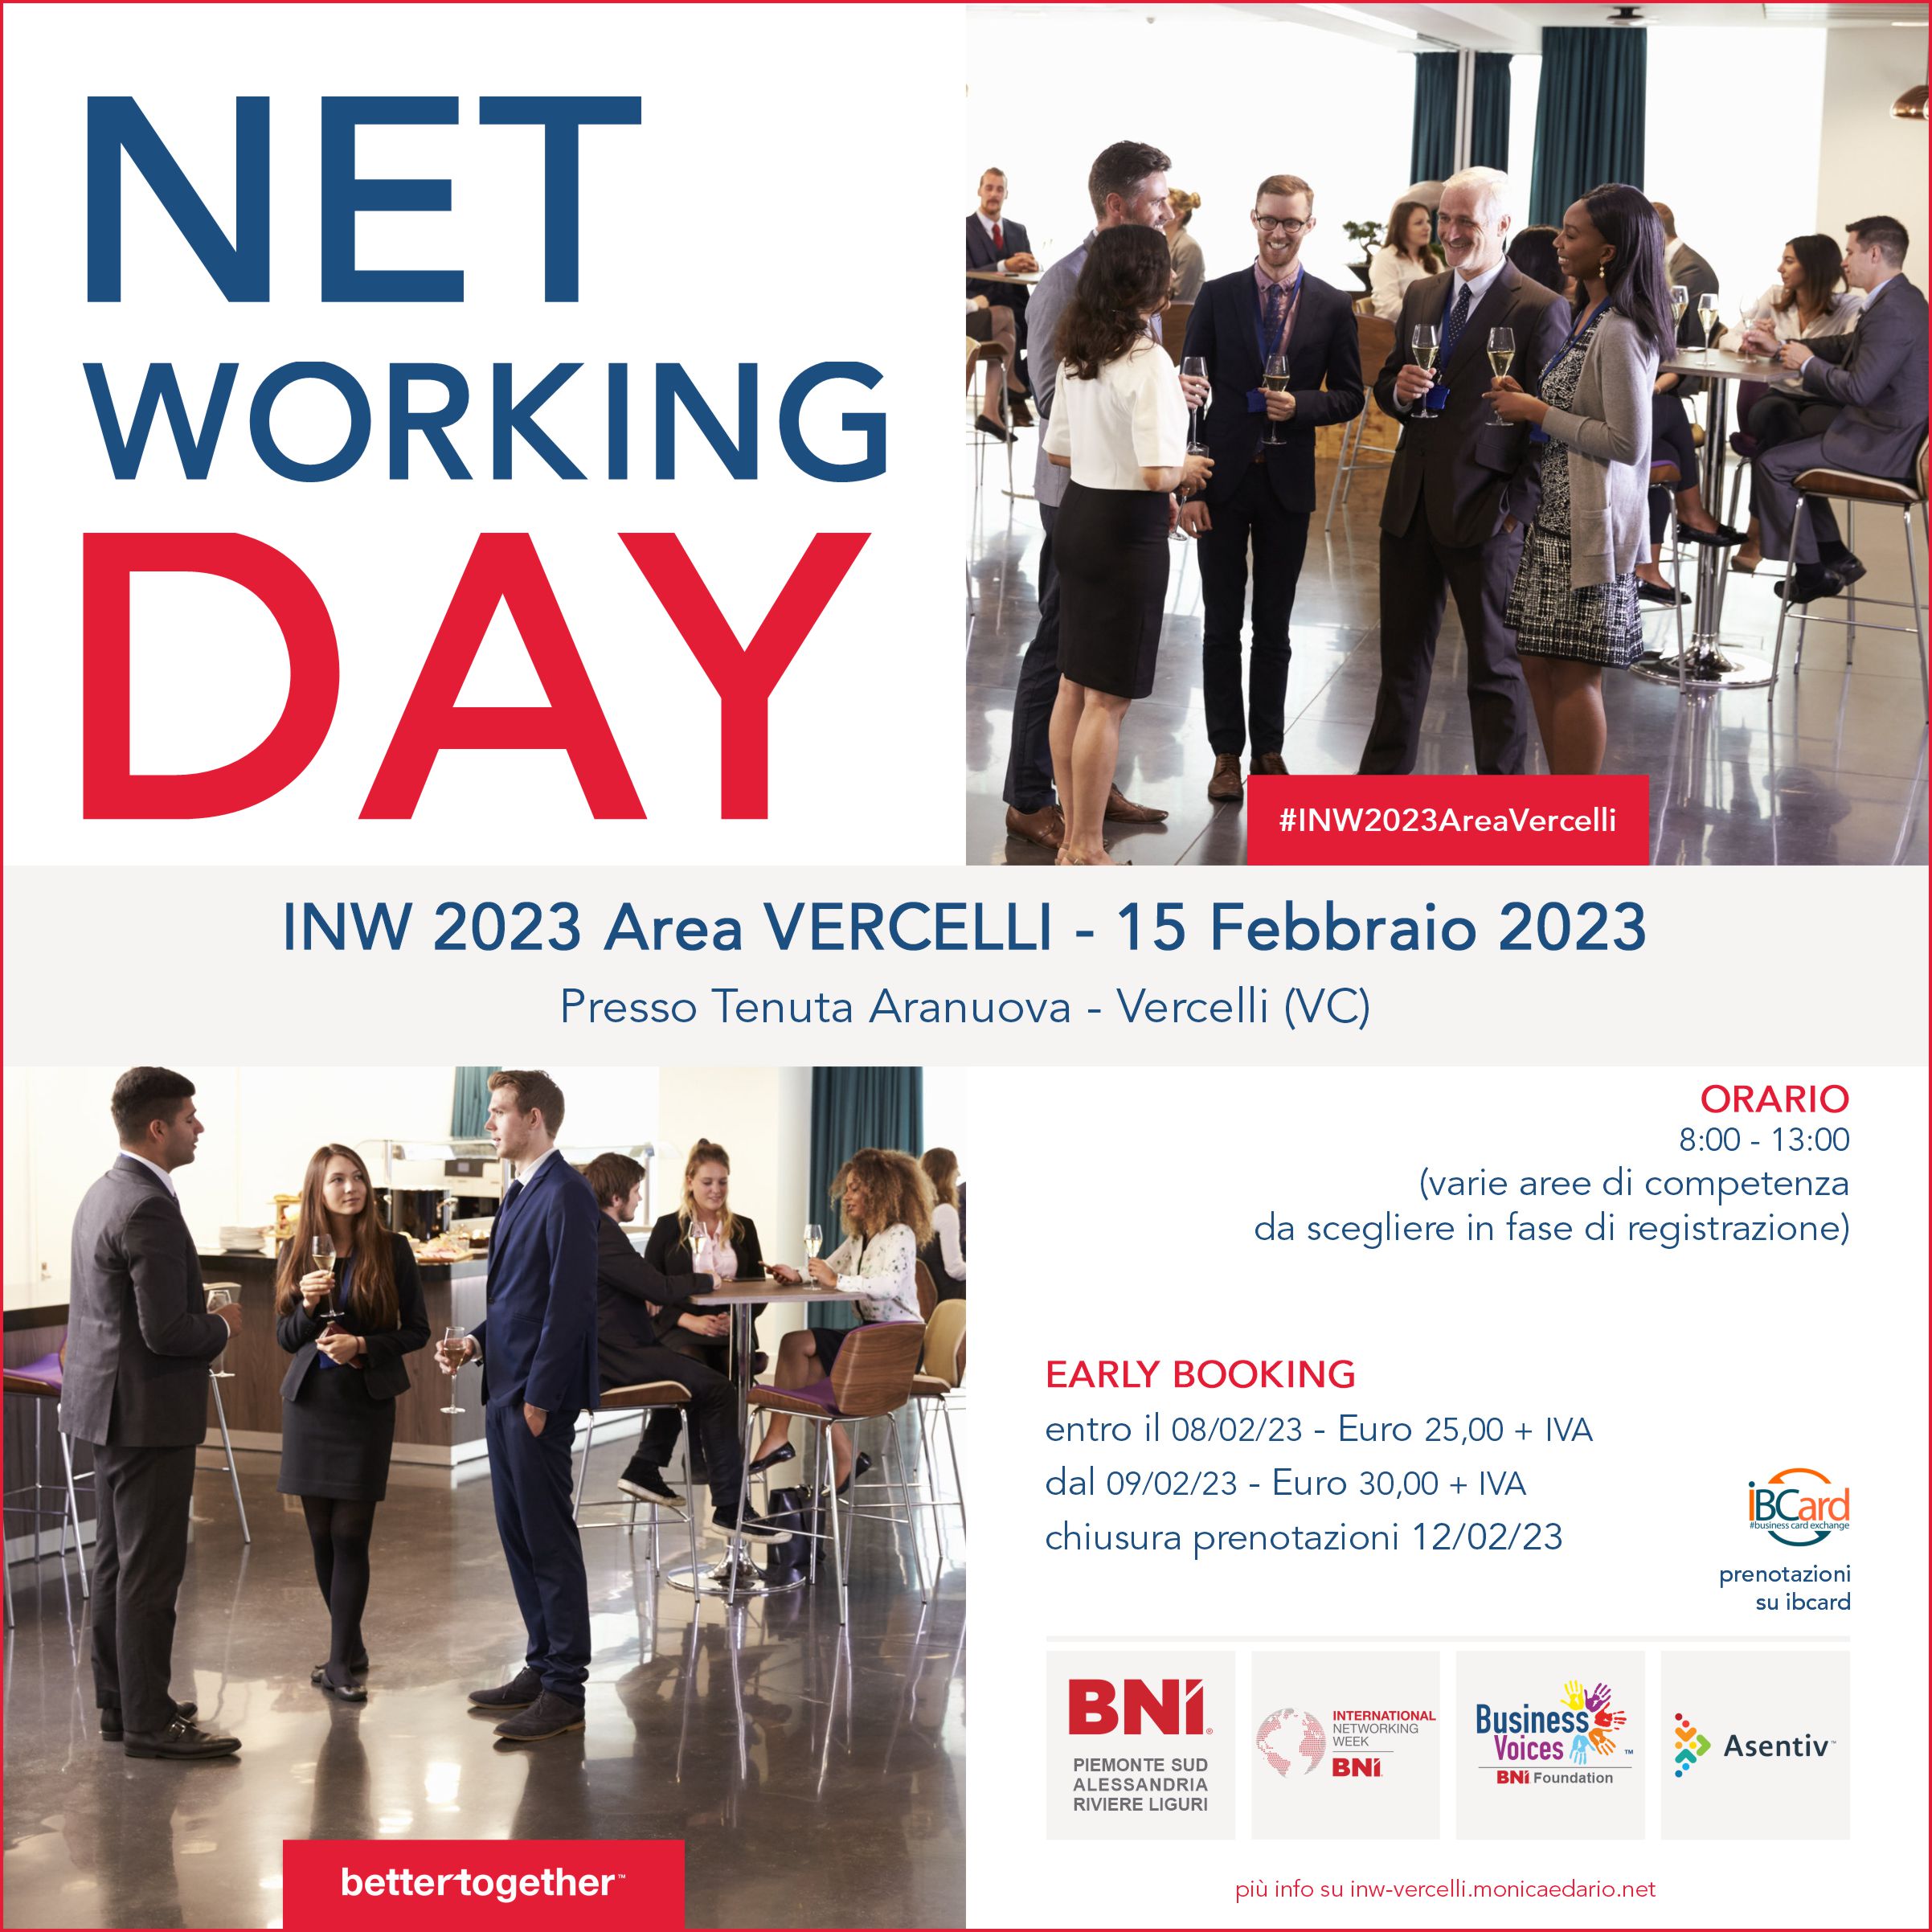 Networking Day - INW2023 Vercelli